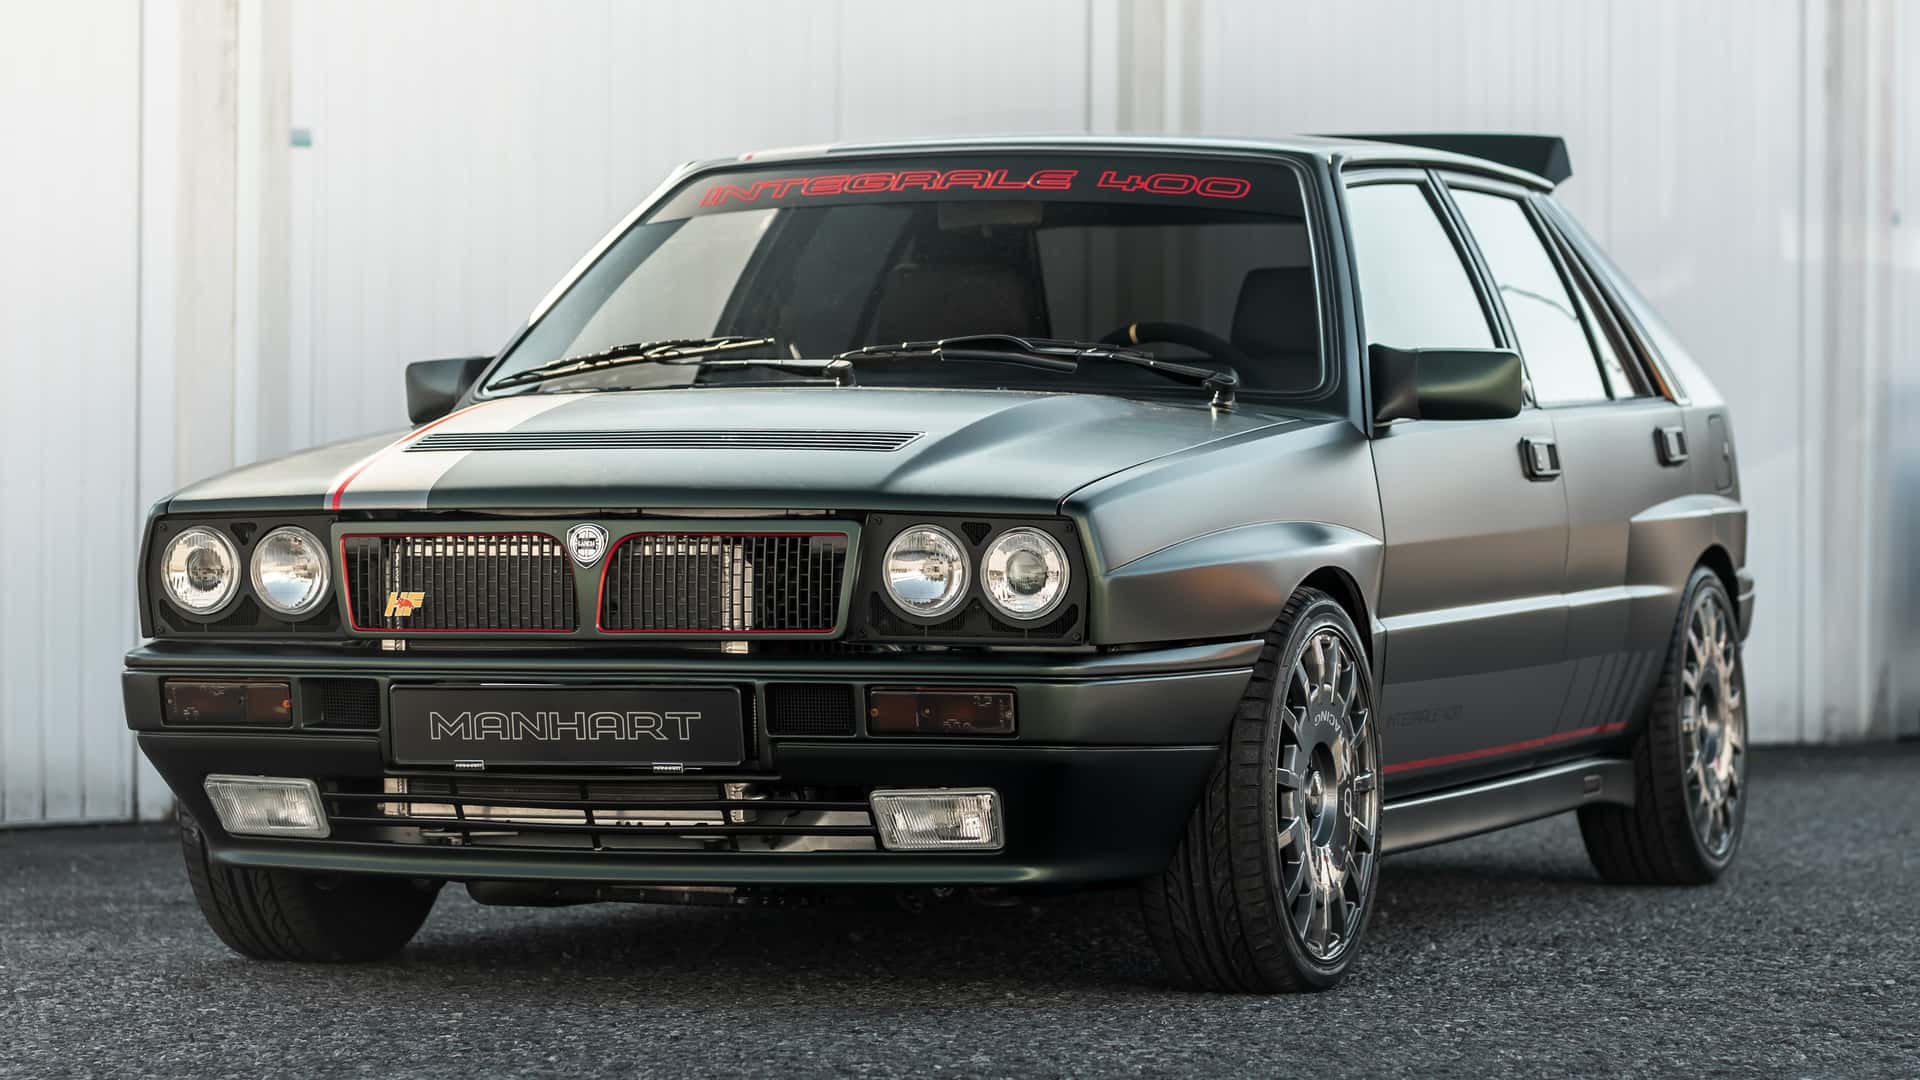 manhart tuned the hell out of the lancia delta integrale 3